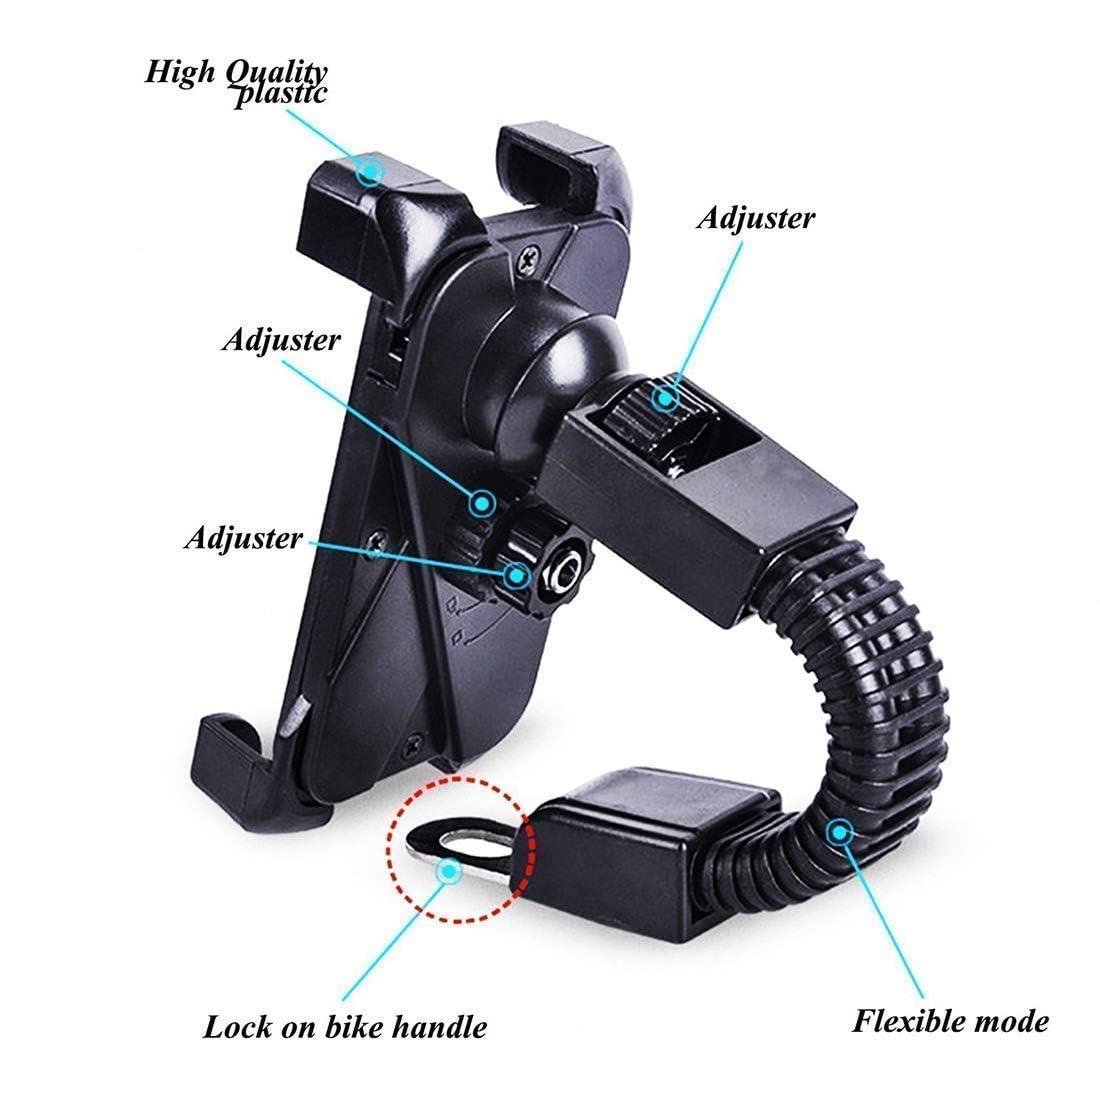 Universal Scooty Bike Phone Holder with Charger, 360° Rotation Anti Shake Holder for All Smartphones (Black)